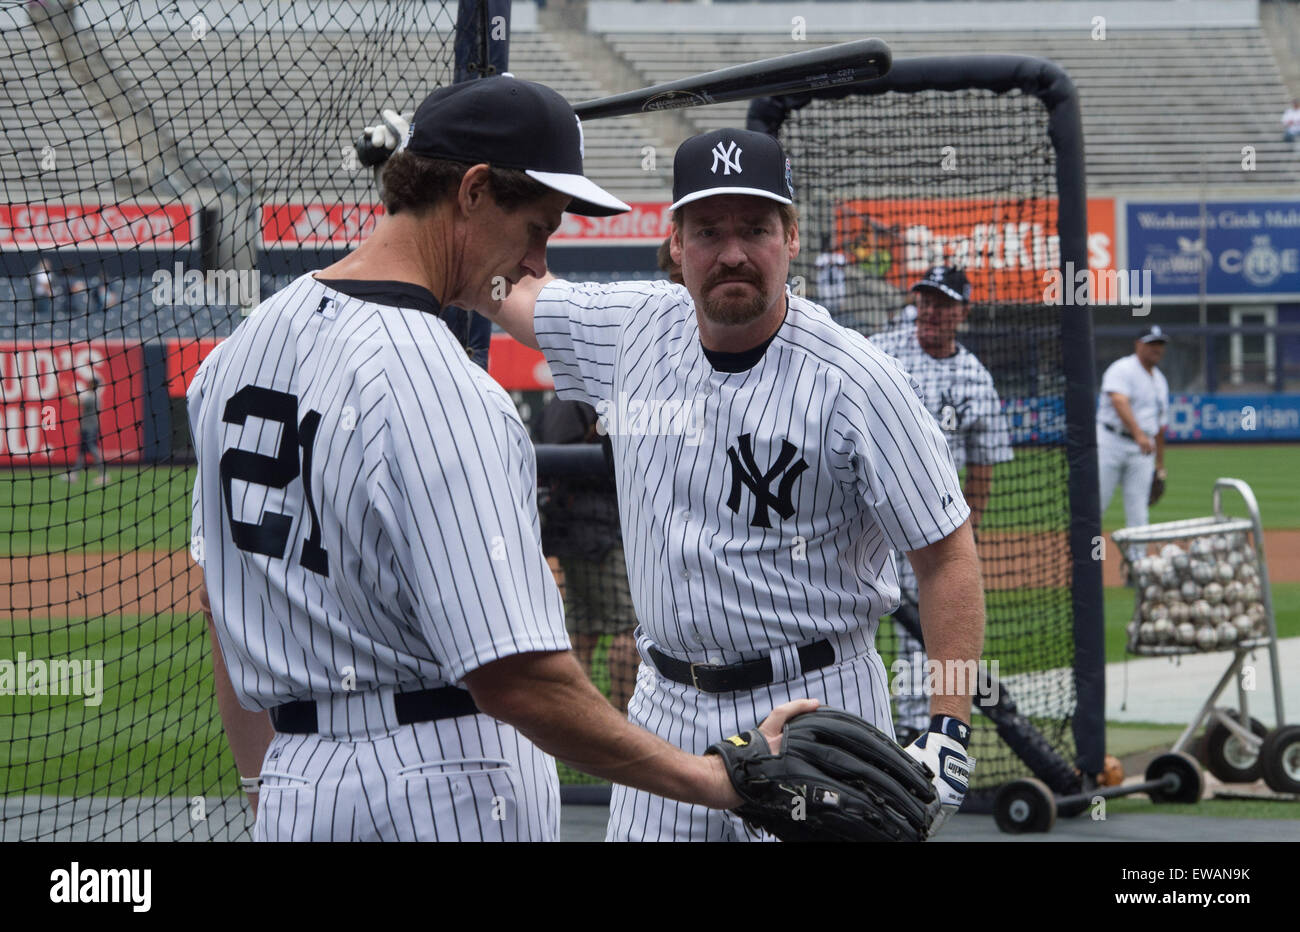 Bronx, NY, USA. 20th June, 2015. PAUL O'NEILL and WADE BOGGS on hand for the